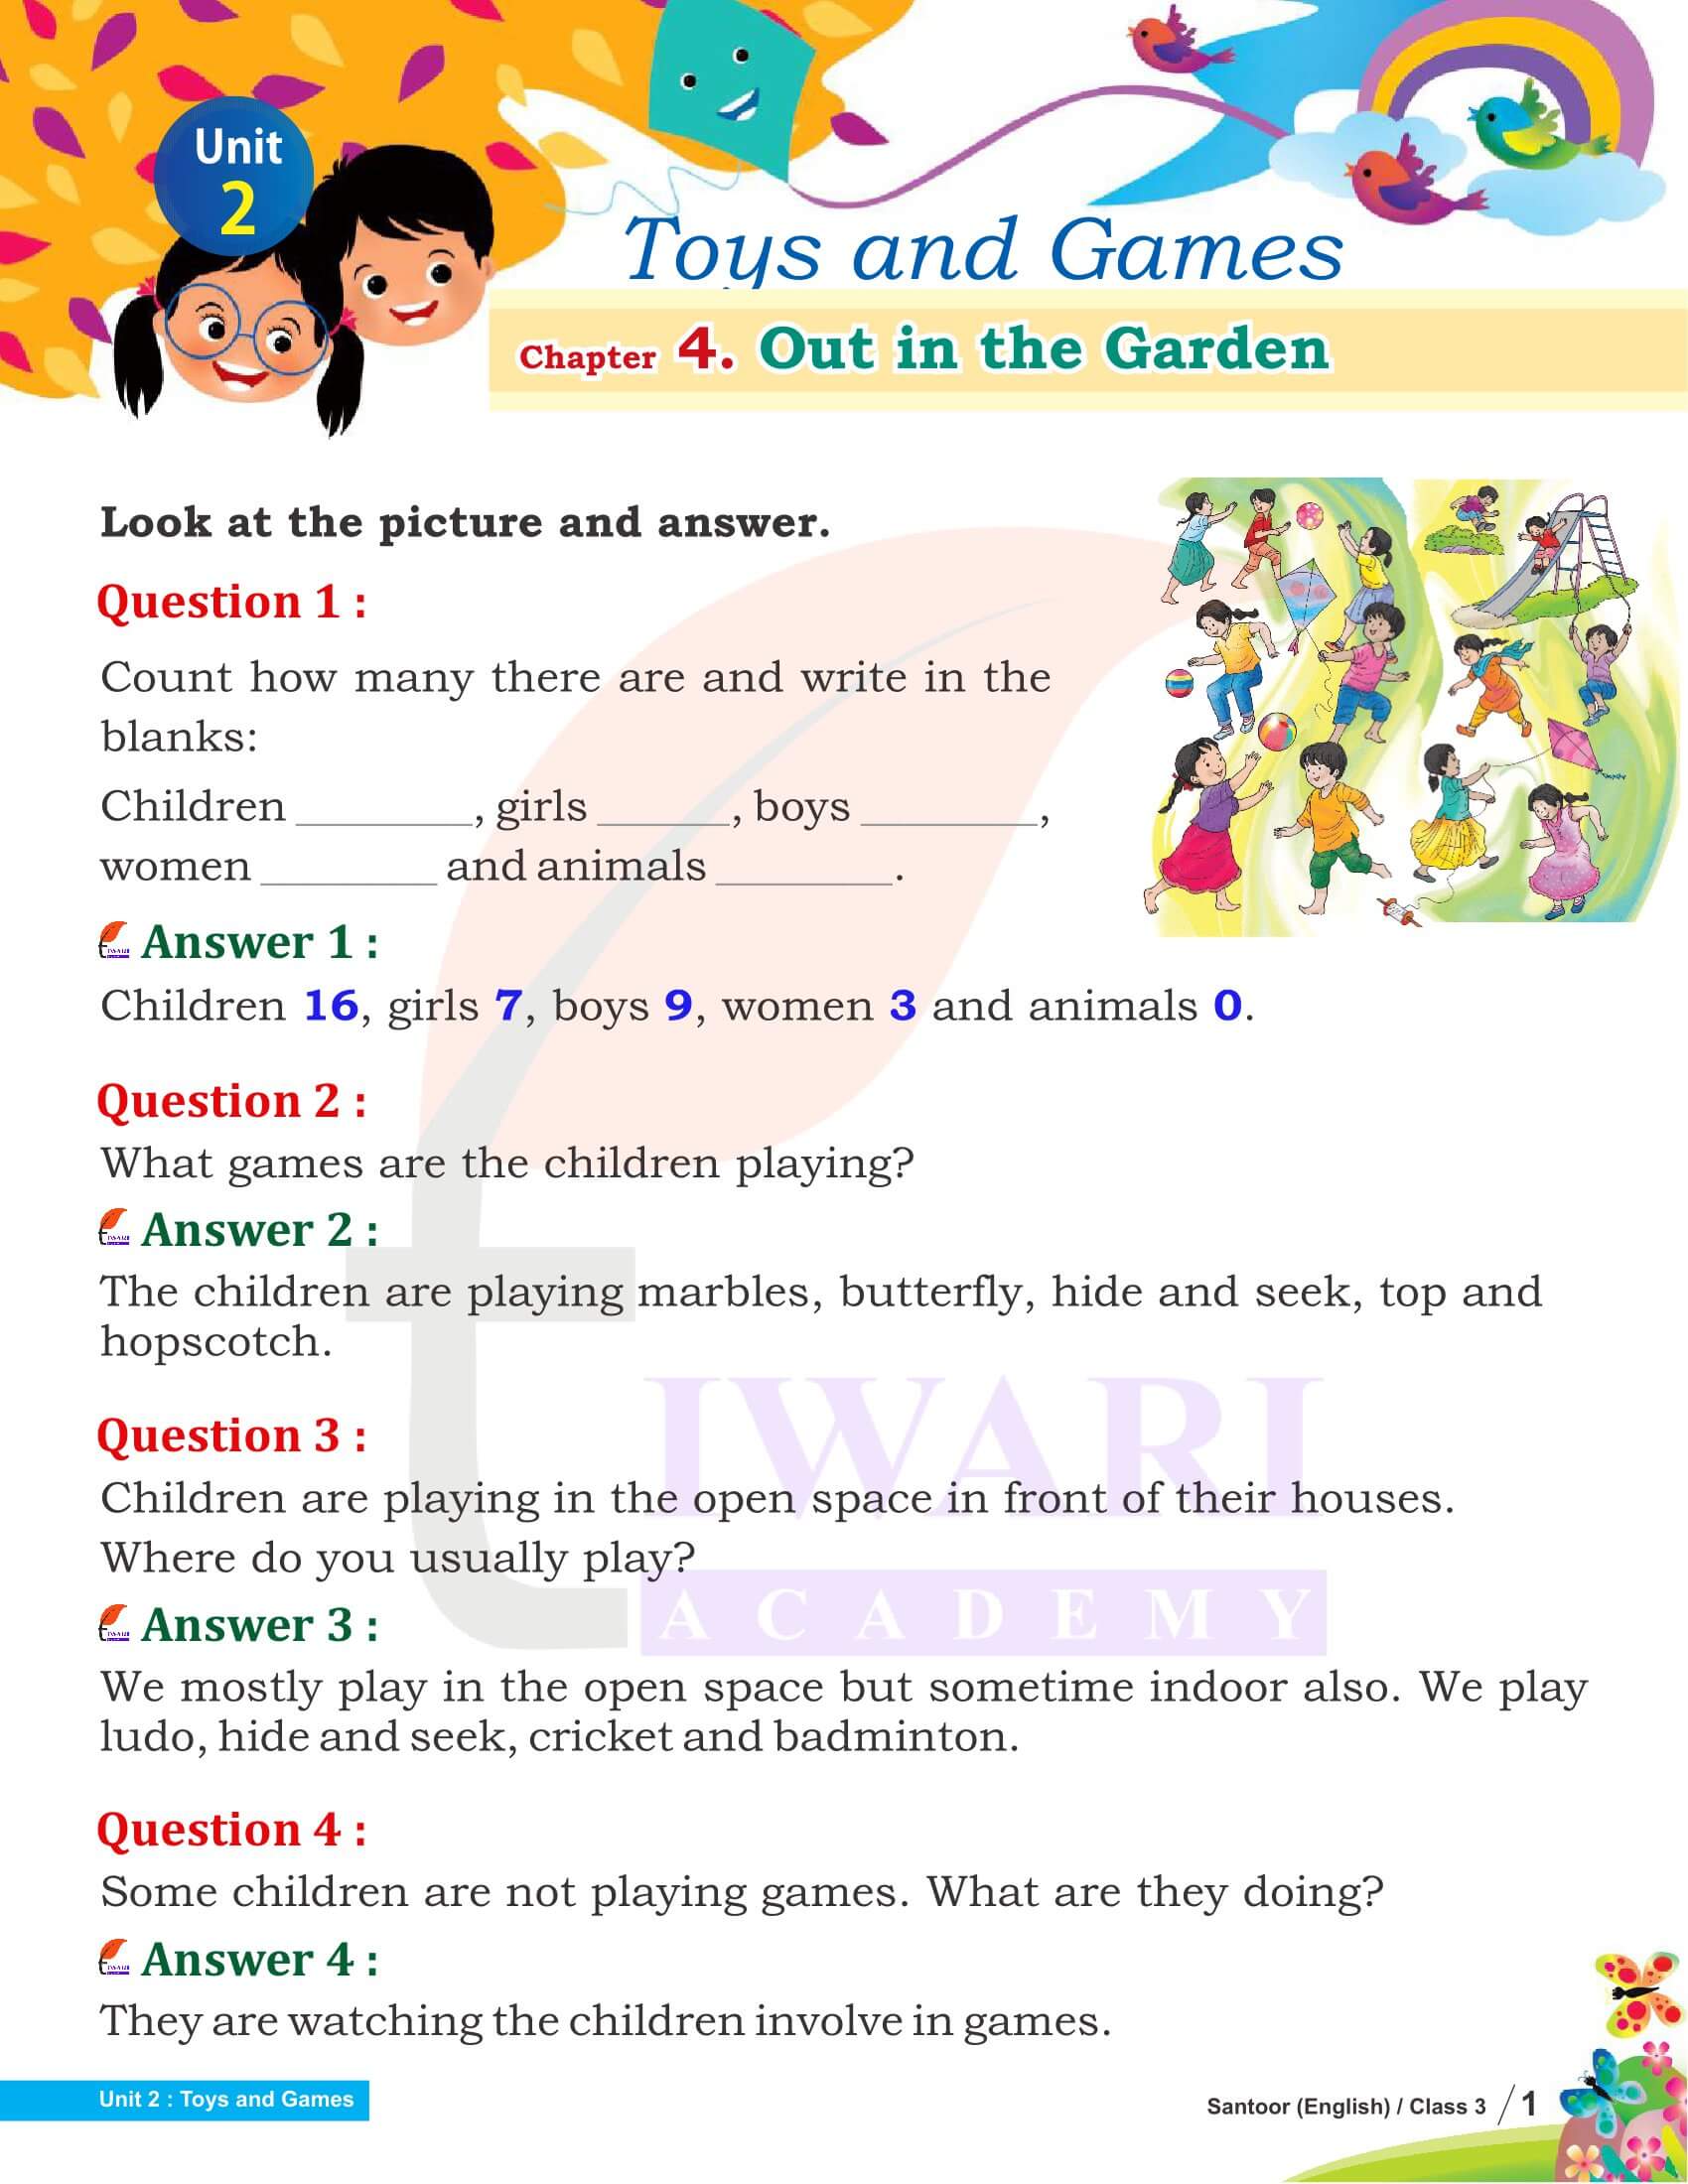 NCERT Solutions for Class 3 English Santoor Chapter 4 Out in the Garden